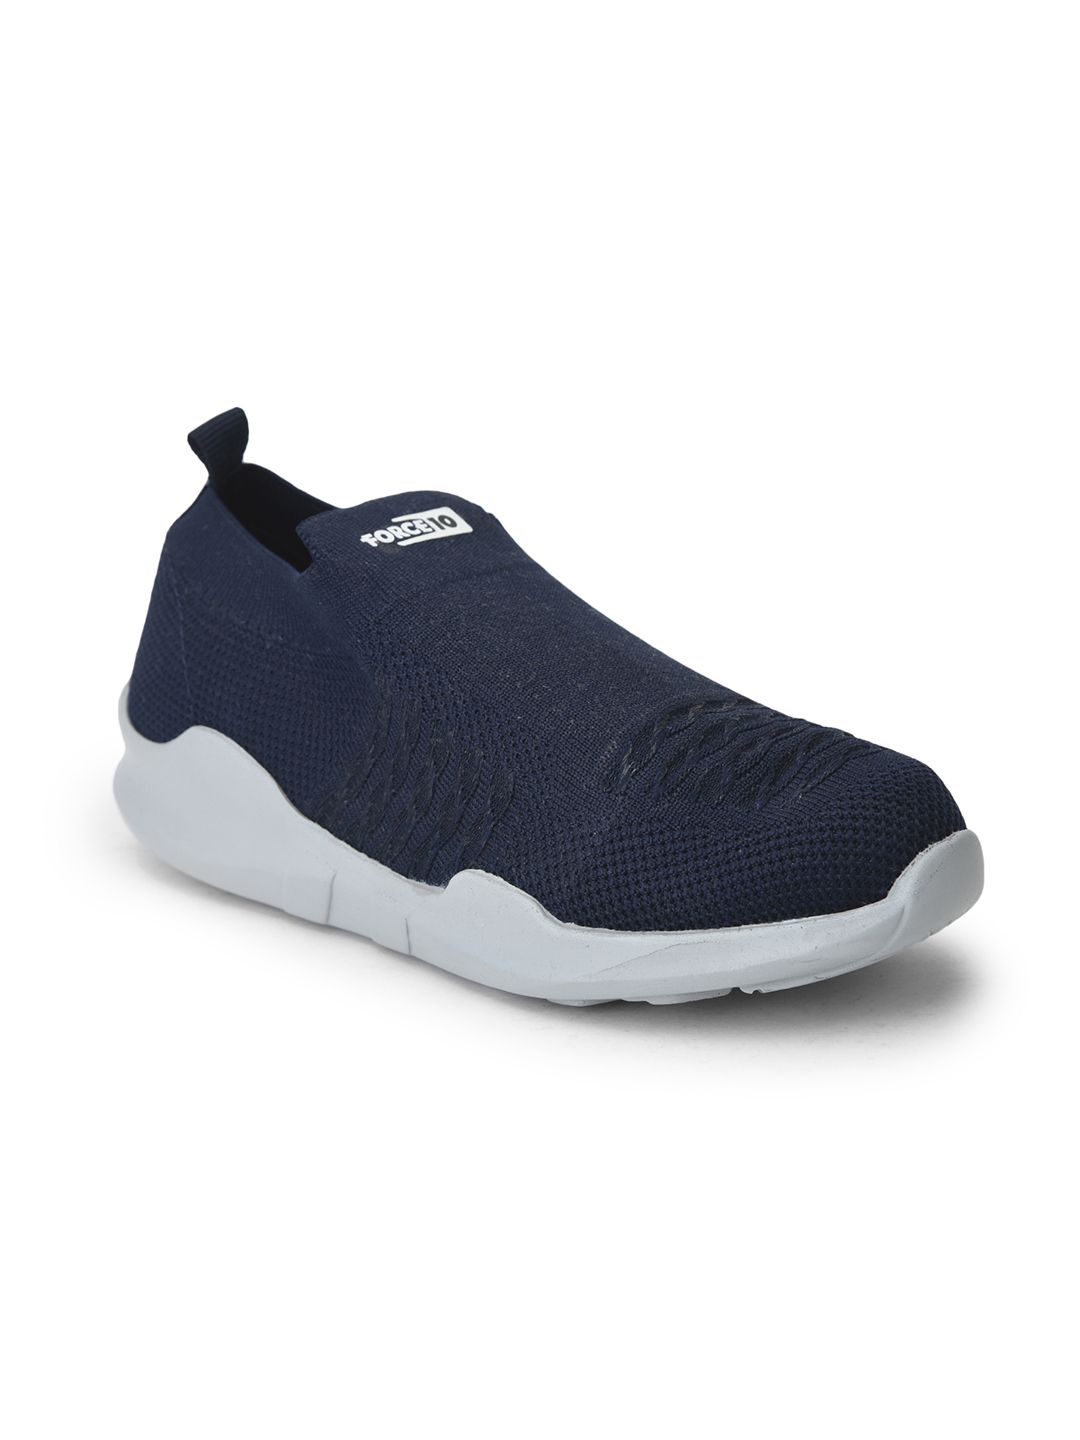 Liberty Women Navy Blue Training or Gym Shoes Price in India